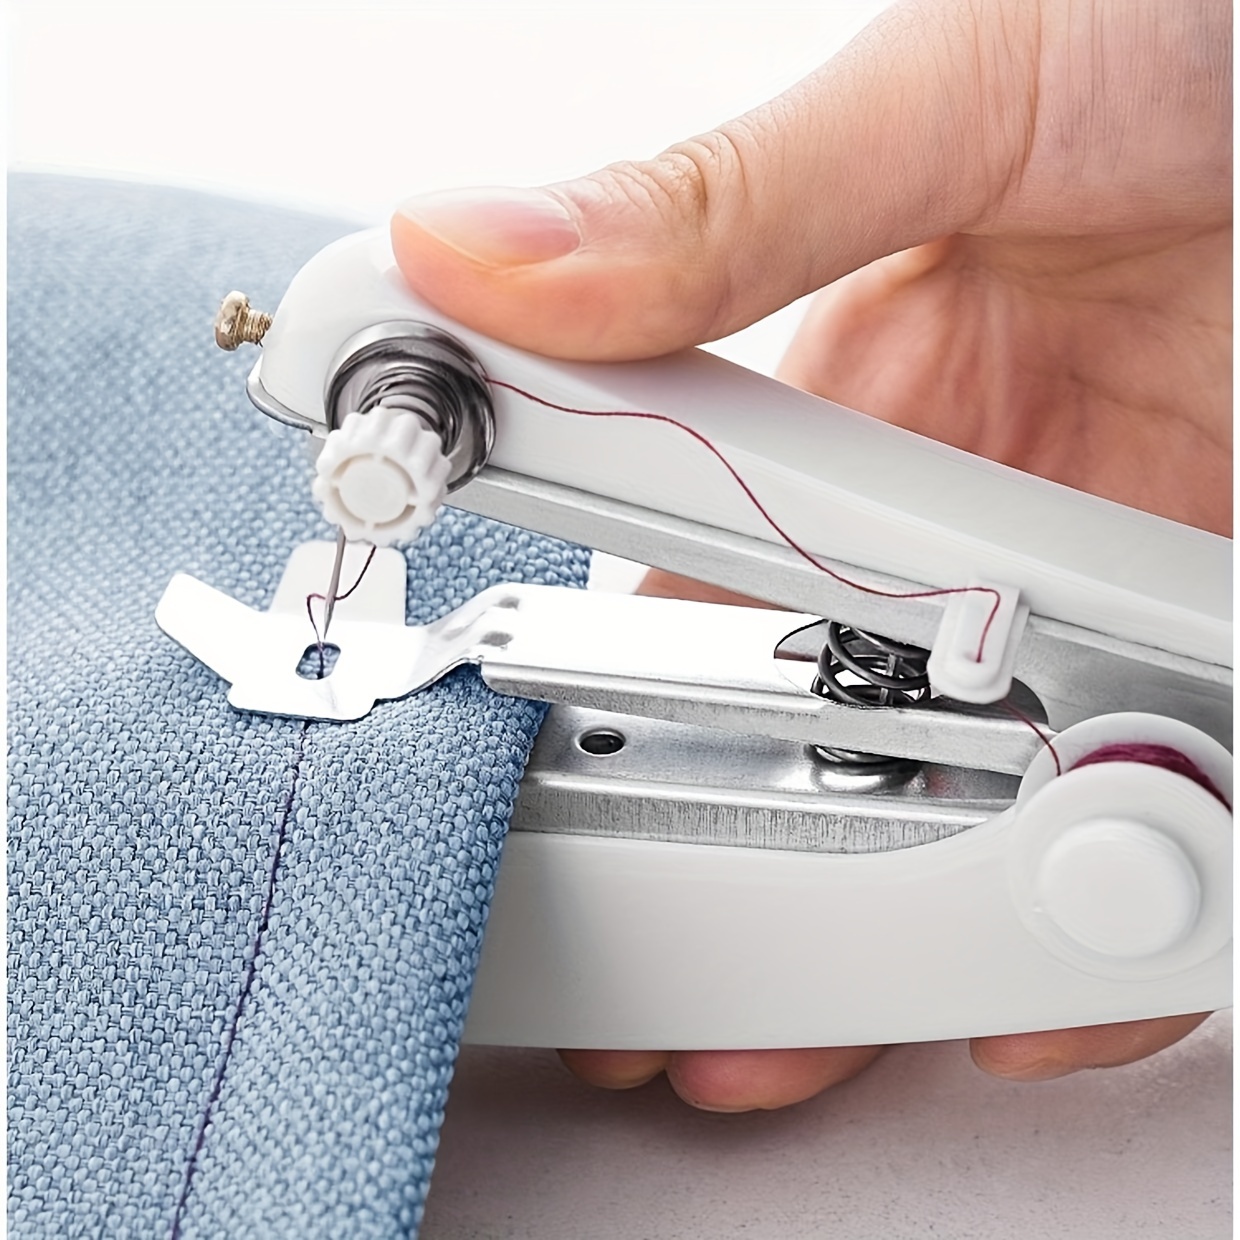 

Portable Mini Handheld Sewing Machine - Easy-to-use, Compact Tailoring Tool For Quick Clothing Repairs & Diy Projects